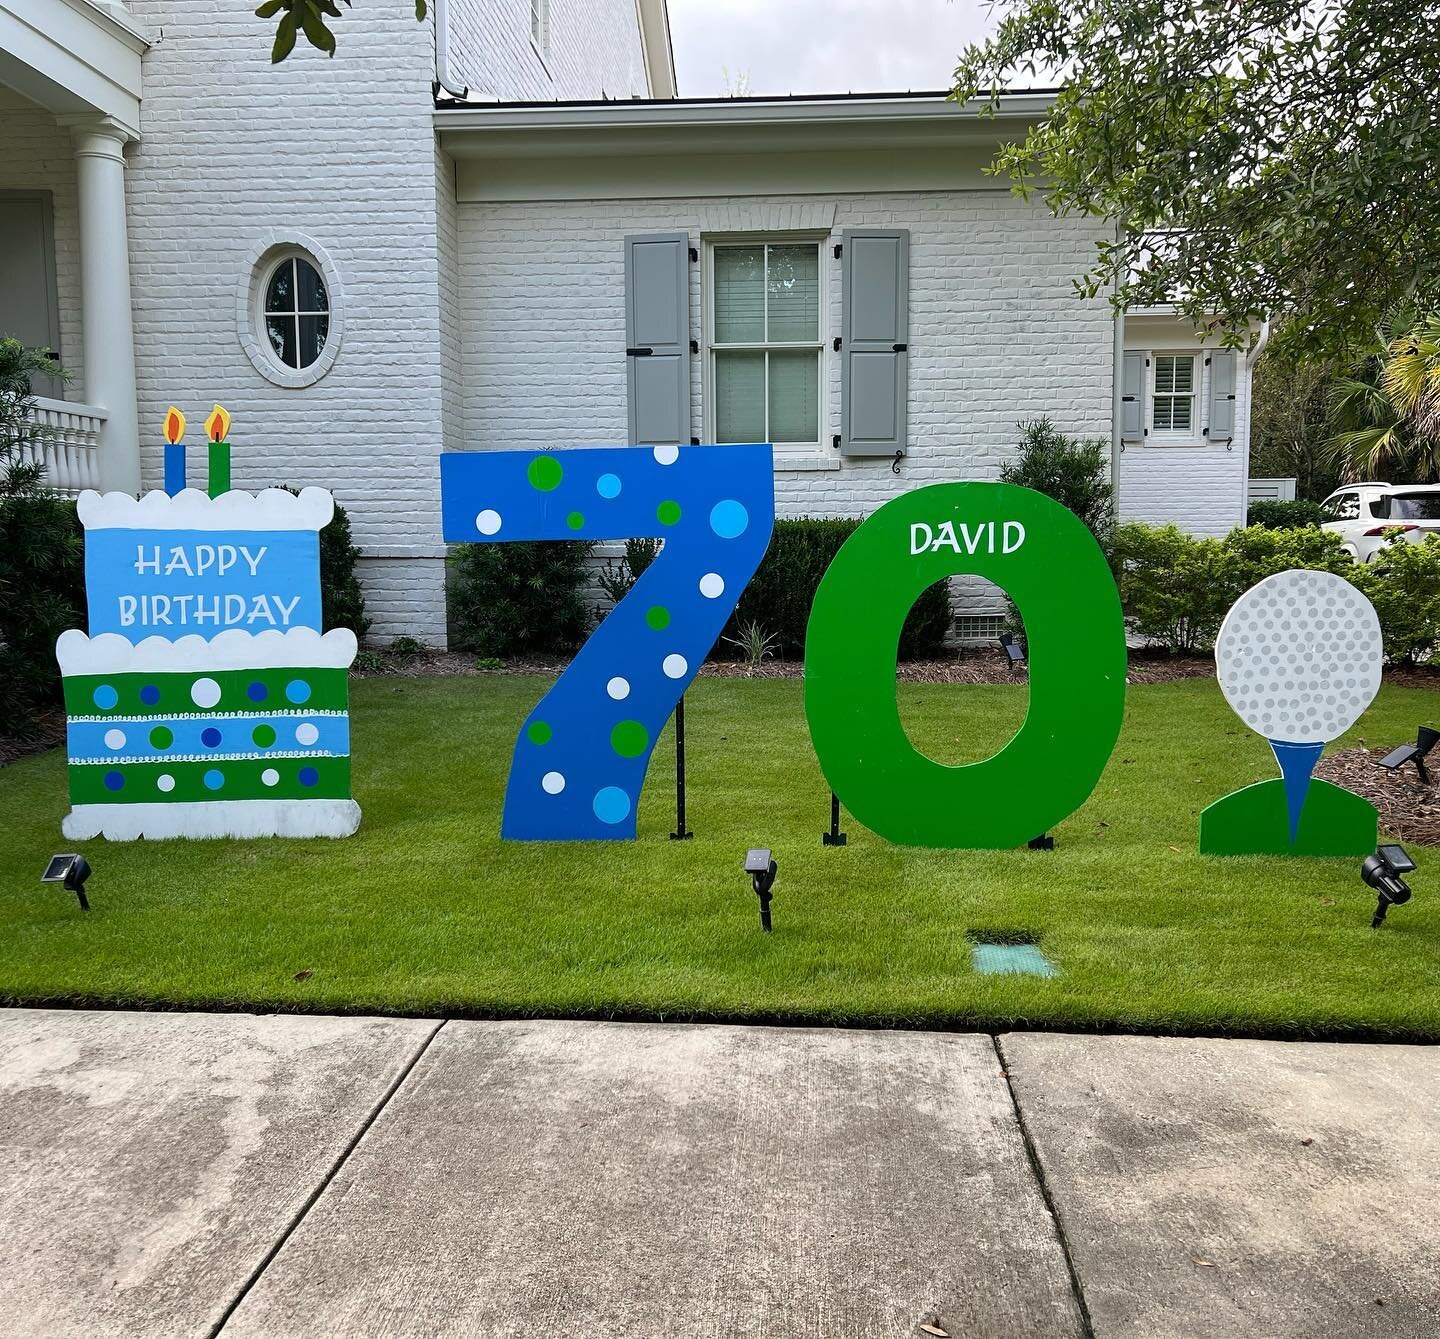 70th birthday surprise! 

To order click the link in our bio or text 843-345-3501

#sassysignschs #charlestonyardsigns #birthdayyardsignscharleston #70thbirthday #danielislandpark #surprise